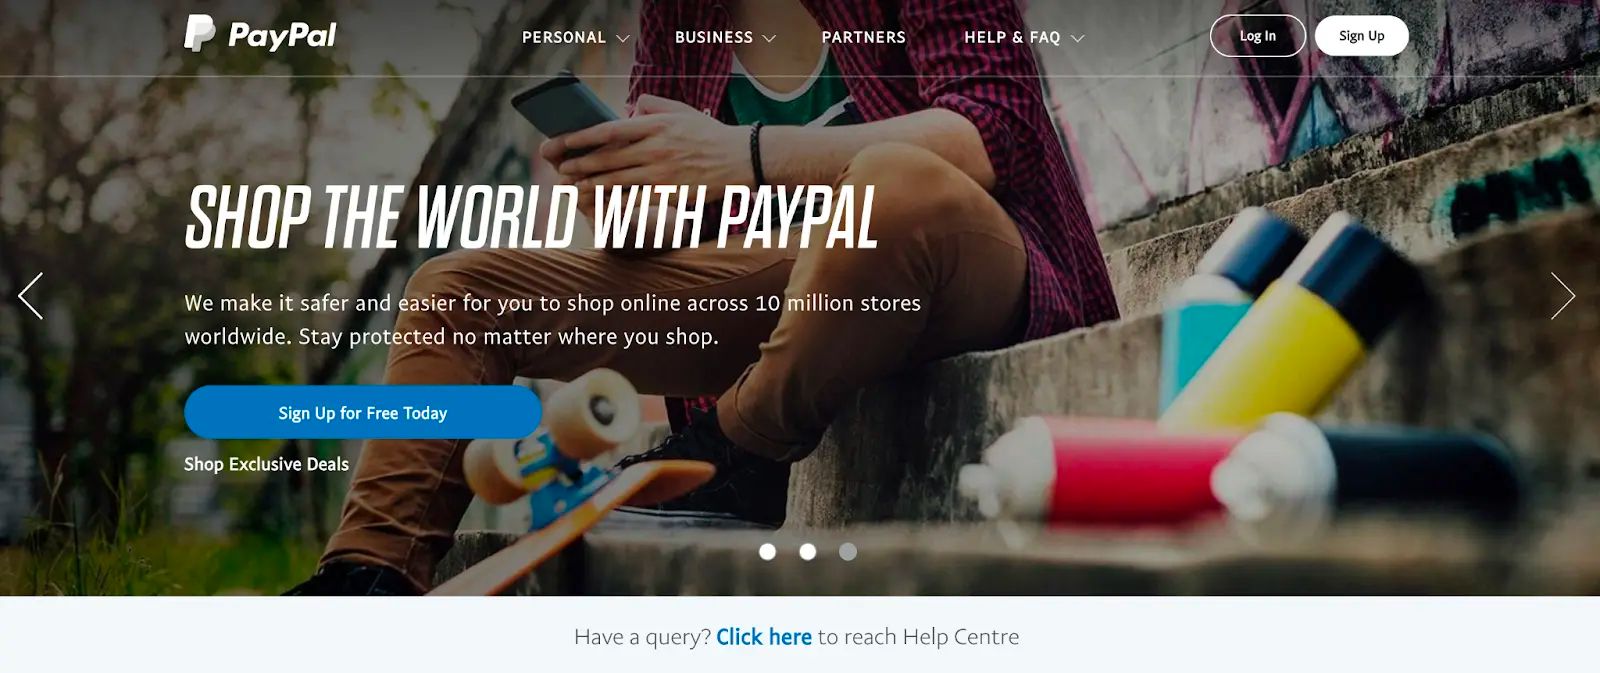 PayPal homepage.